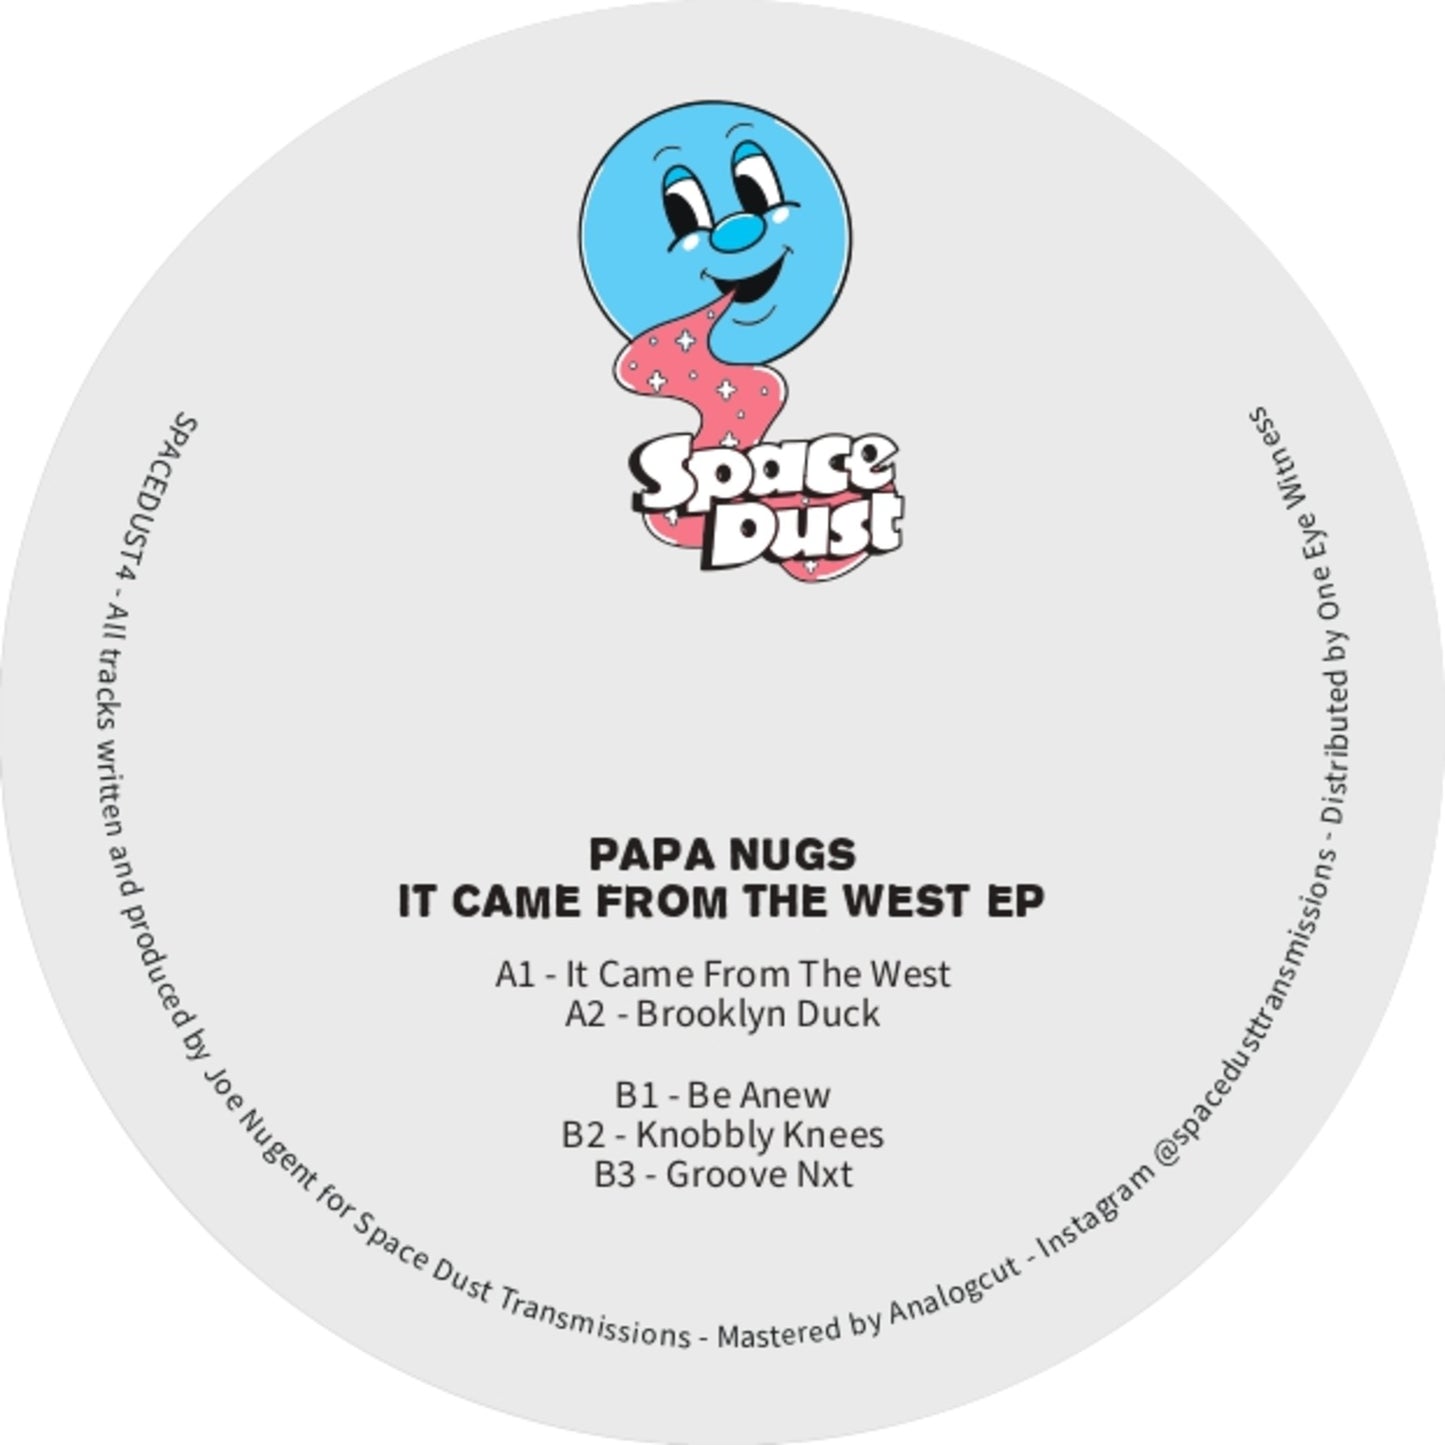 IT CAME FROM THE WEST EP